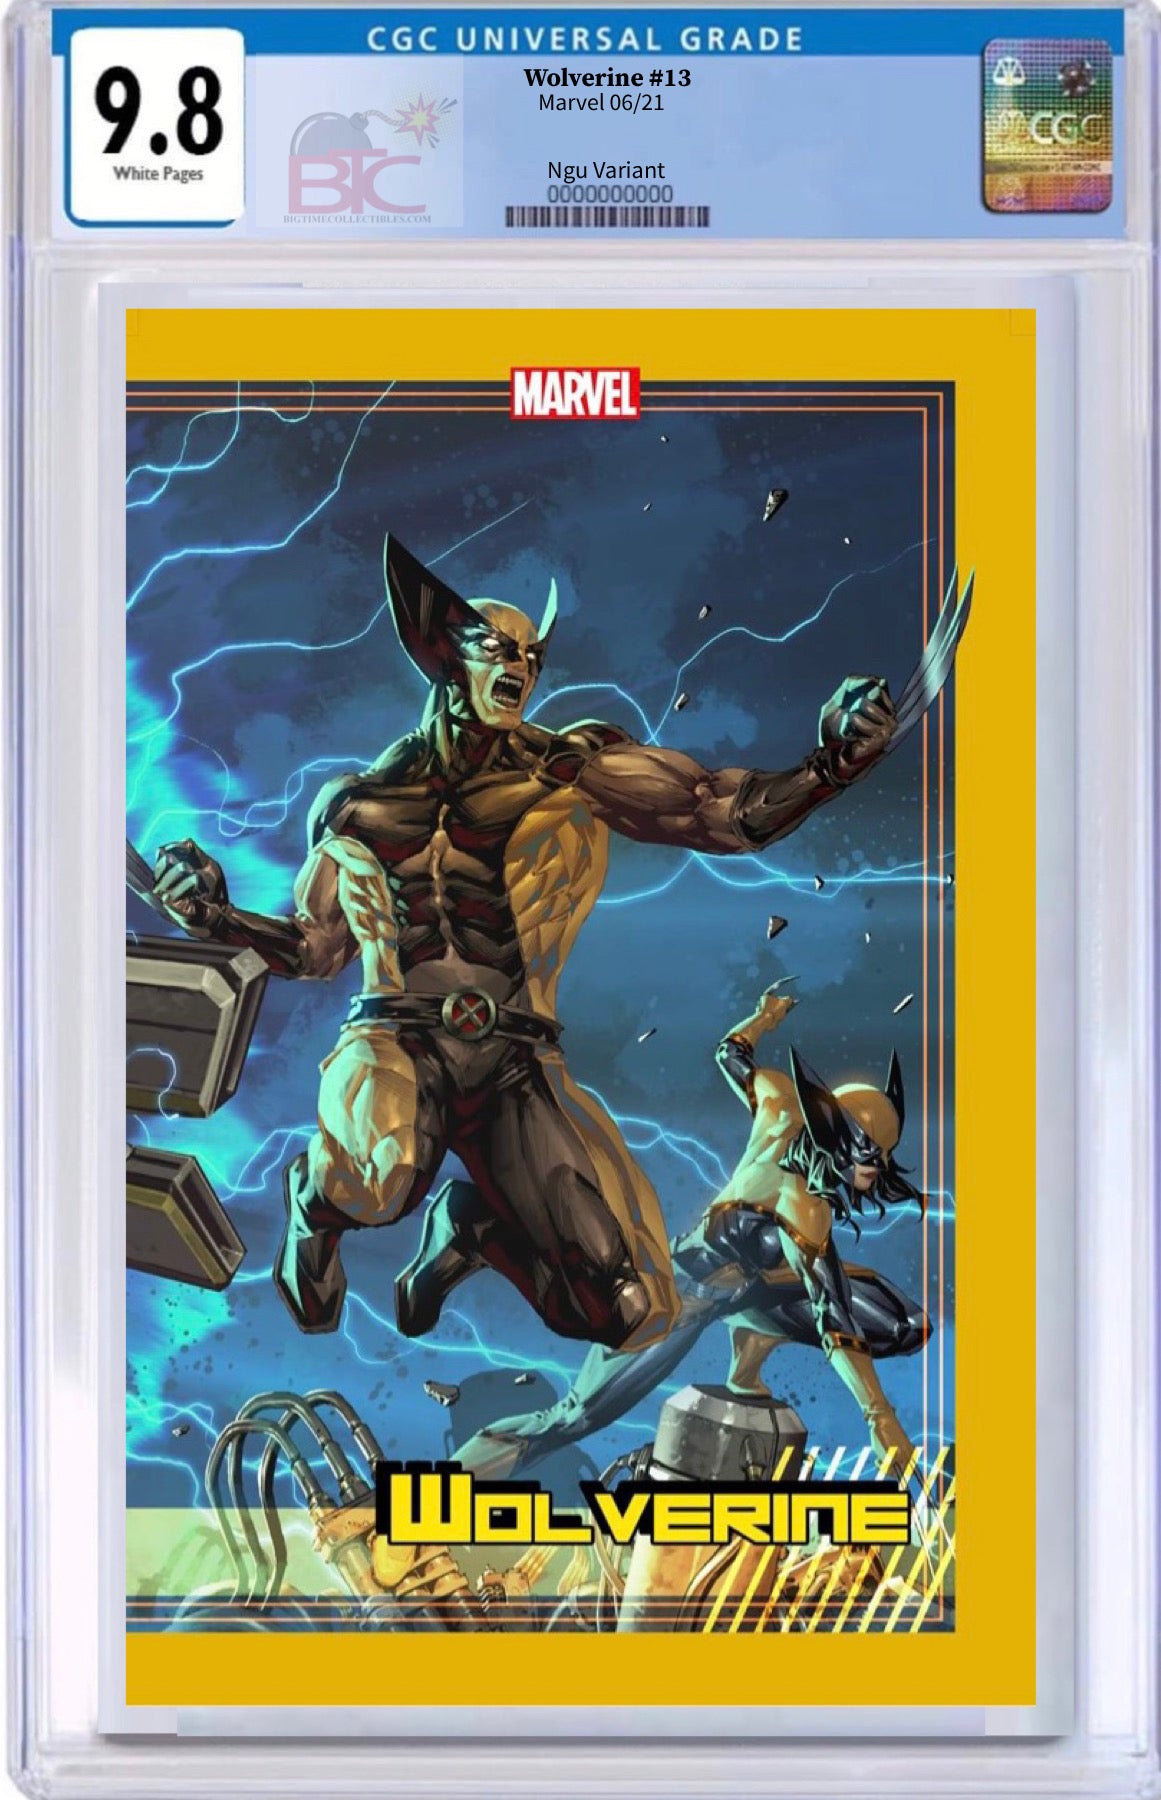 WOLVERINE #13 & CABLE #11 KAEL NGU CONNECTING TRADING CARD SERIES ONE EXCLUSIVE VARIANT